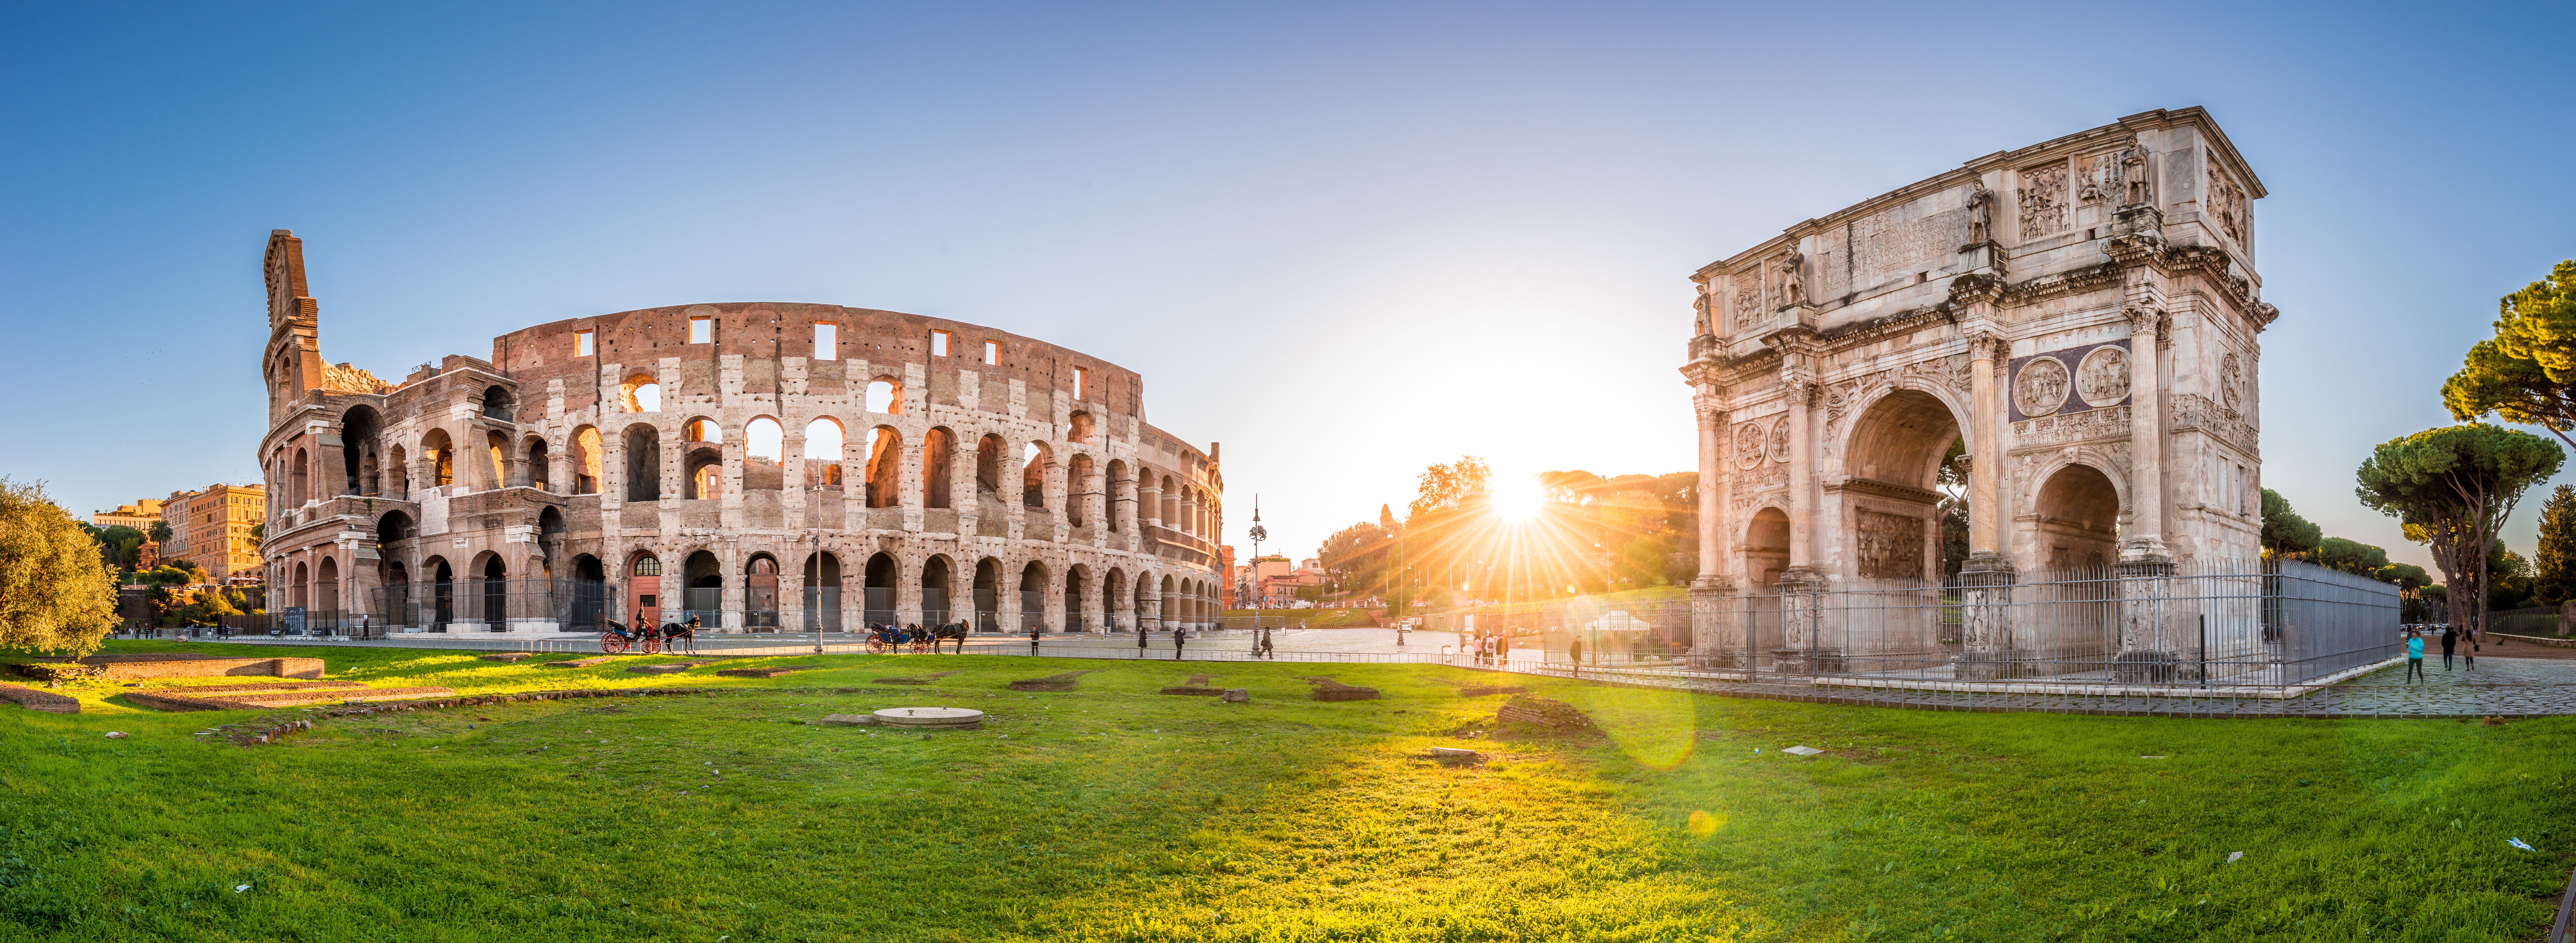 Overnight in Rome and Colosseum, Roman Forum, Palatine Hill Experience